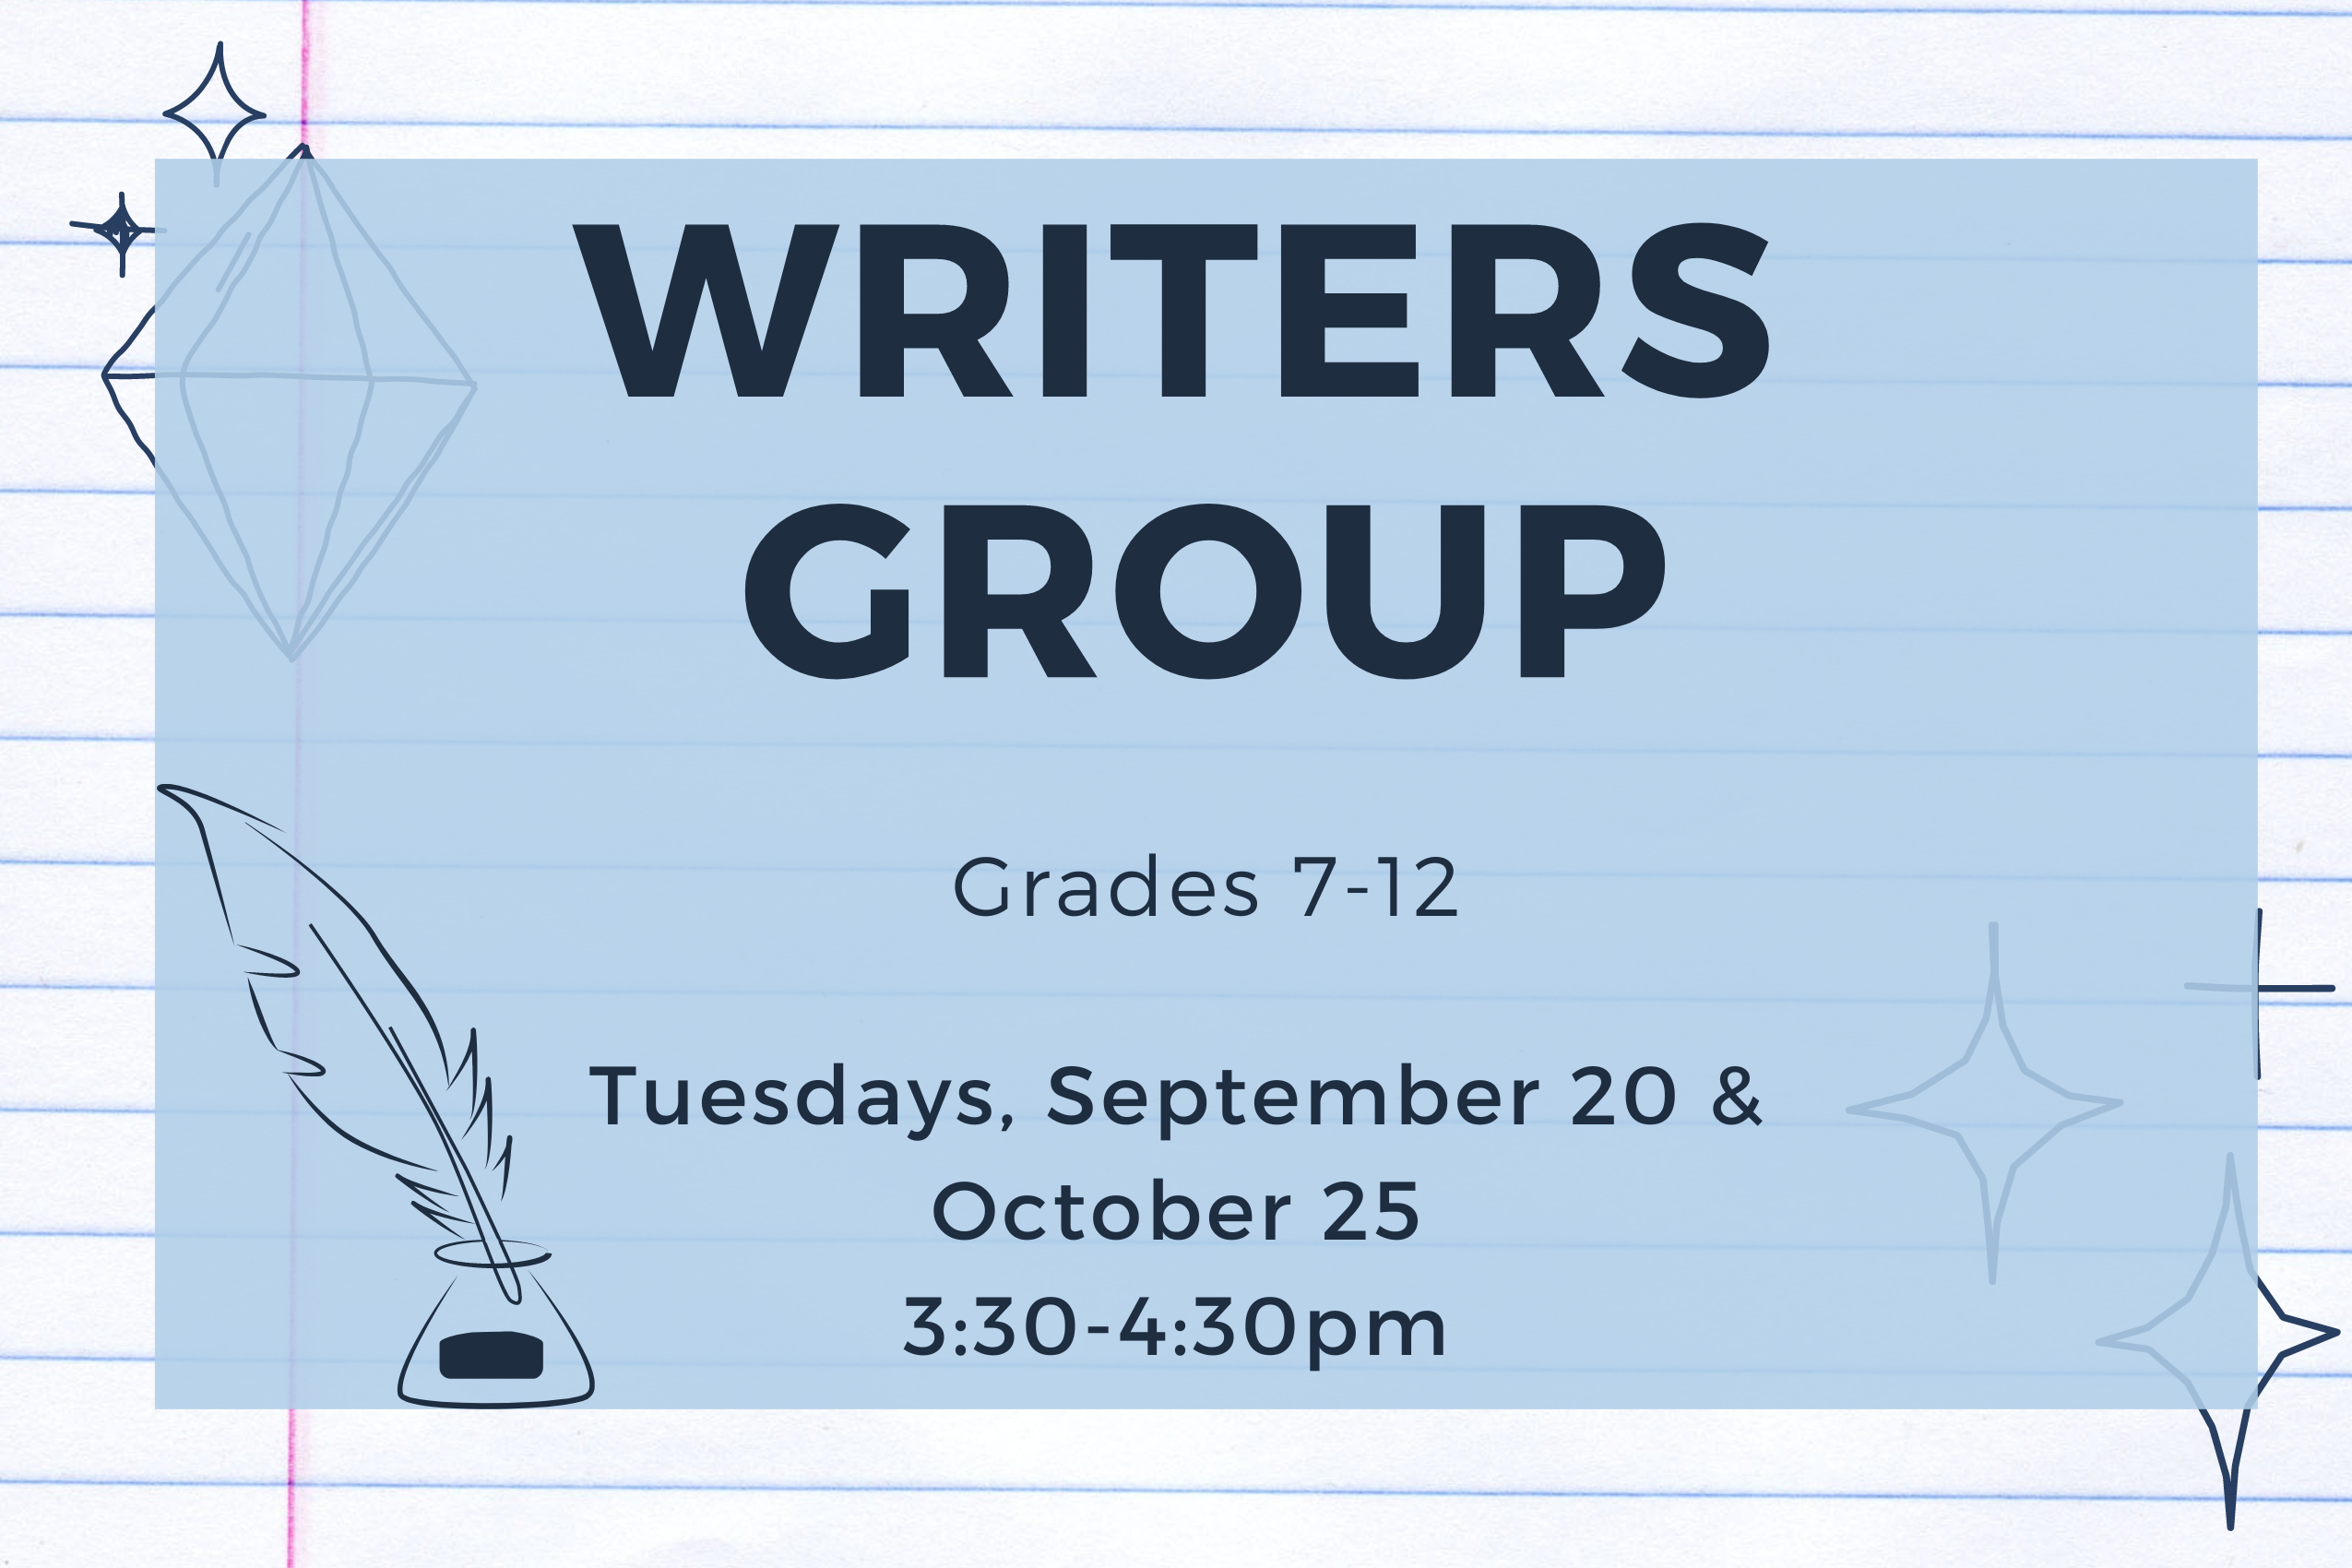 Program flyer with the following text, "Writers Group. Grades 7-12. Tuesdays, September 20 & October 25. 3:30-4:30pm."